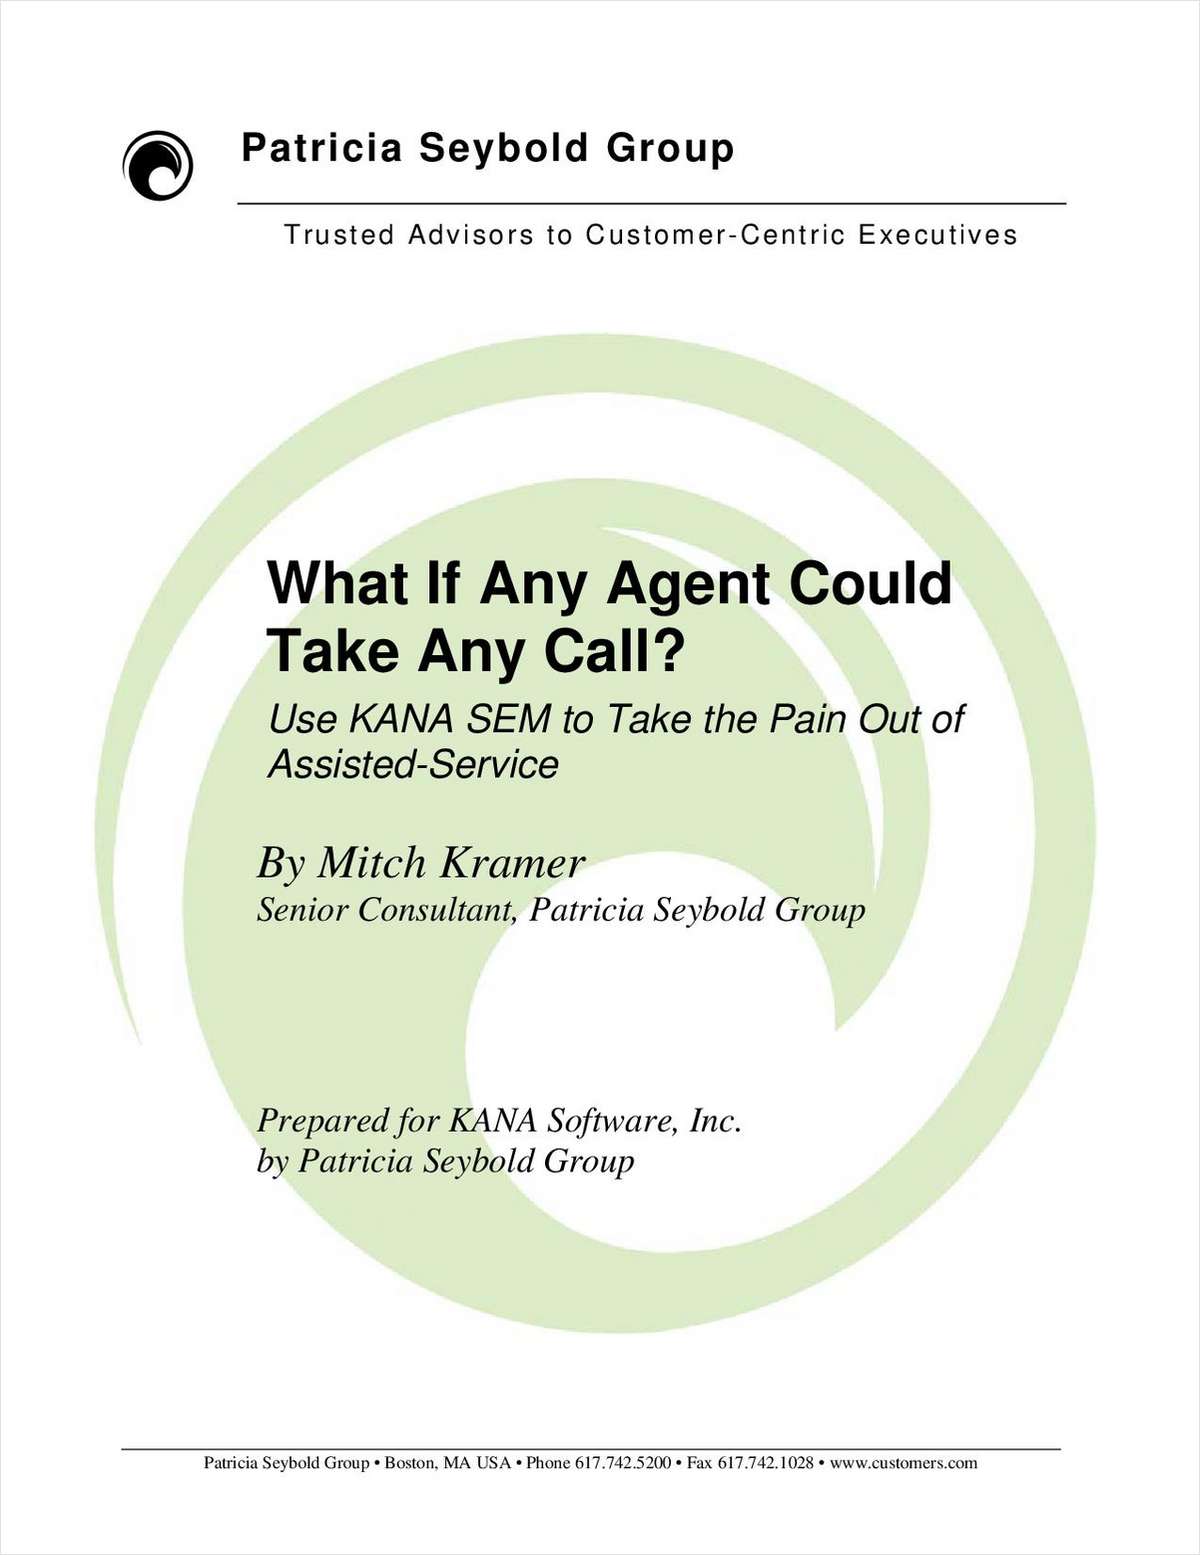 Use KANA SEM to Take the Pain Out of Assisted-Service